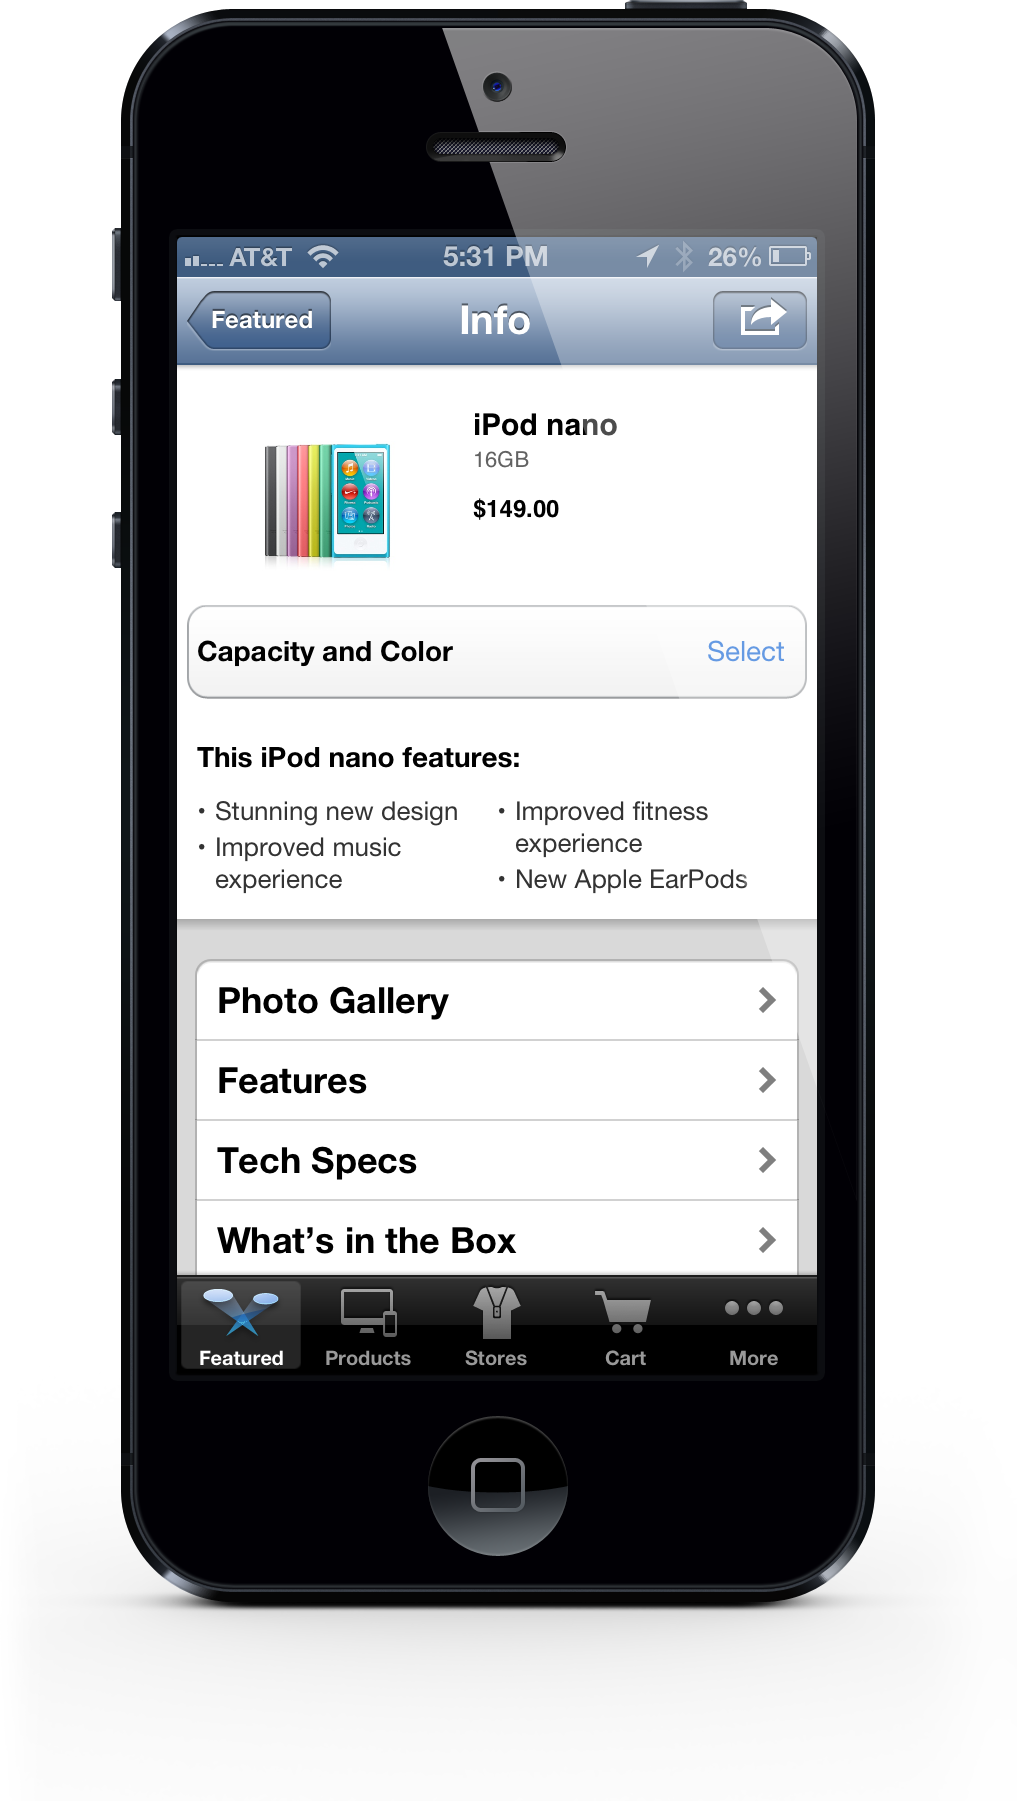 Pop! Apple Store App Updated For iPhone 5 Support